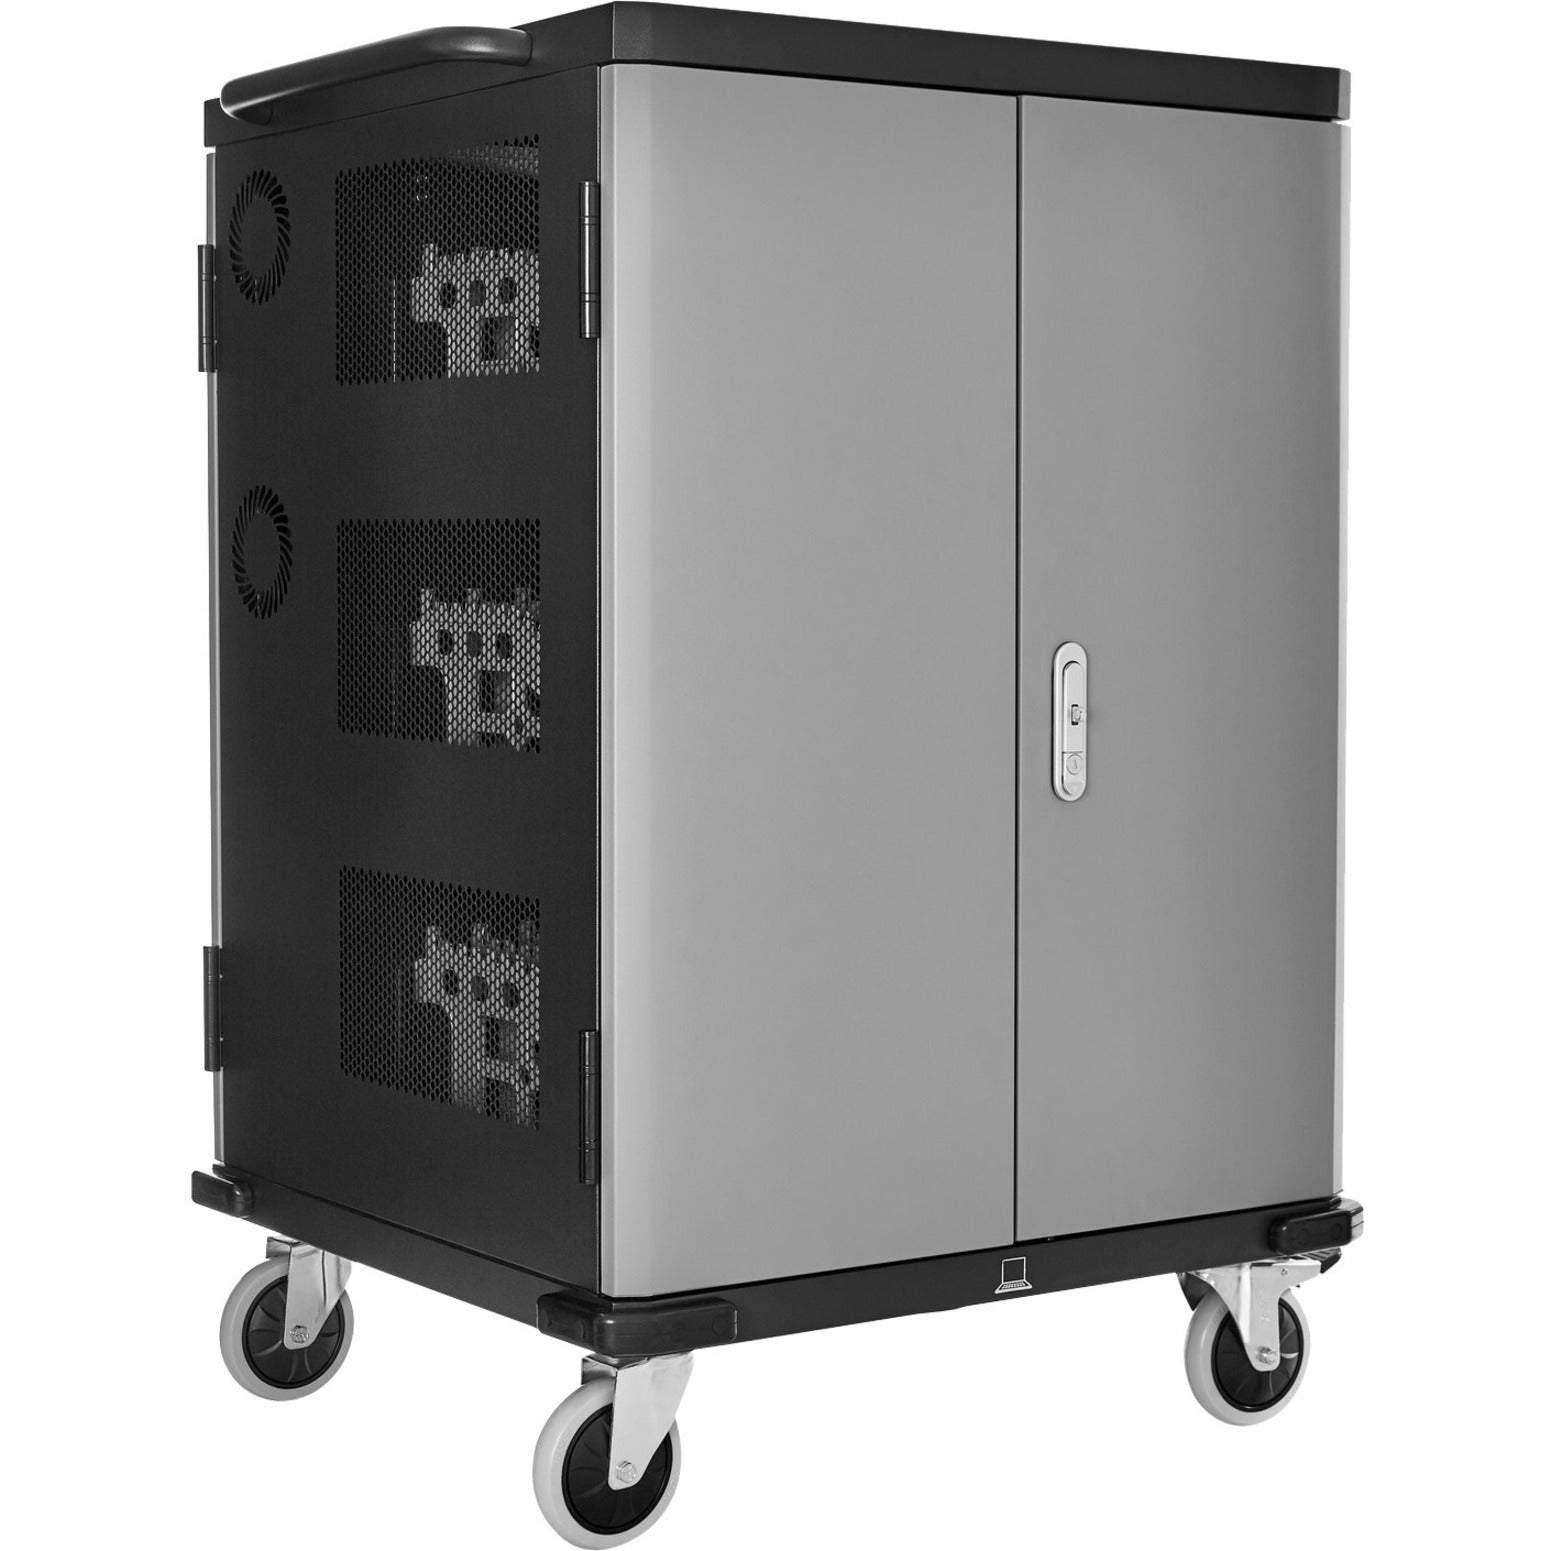 V7 CHGCT36-1N Charge Cart - Secure, Store and Charge Chromebooks, Notebooks and Tablets